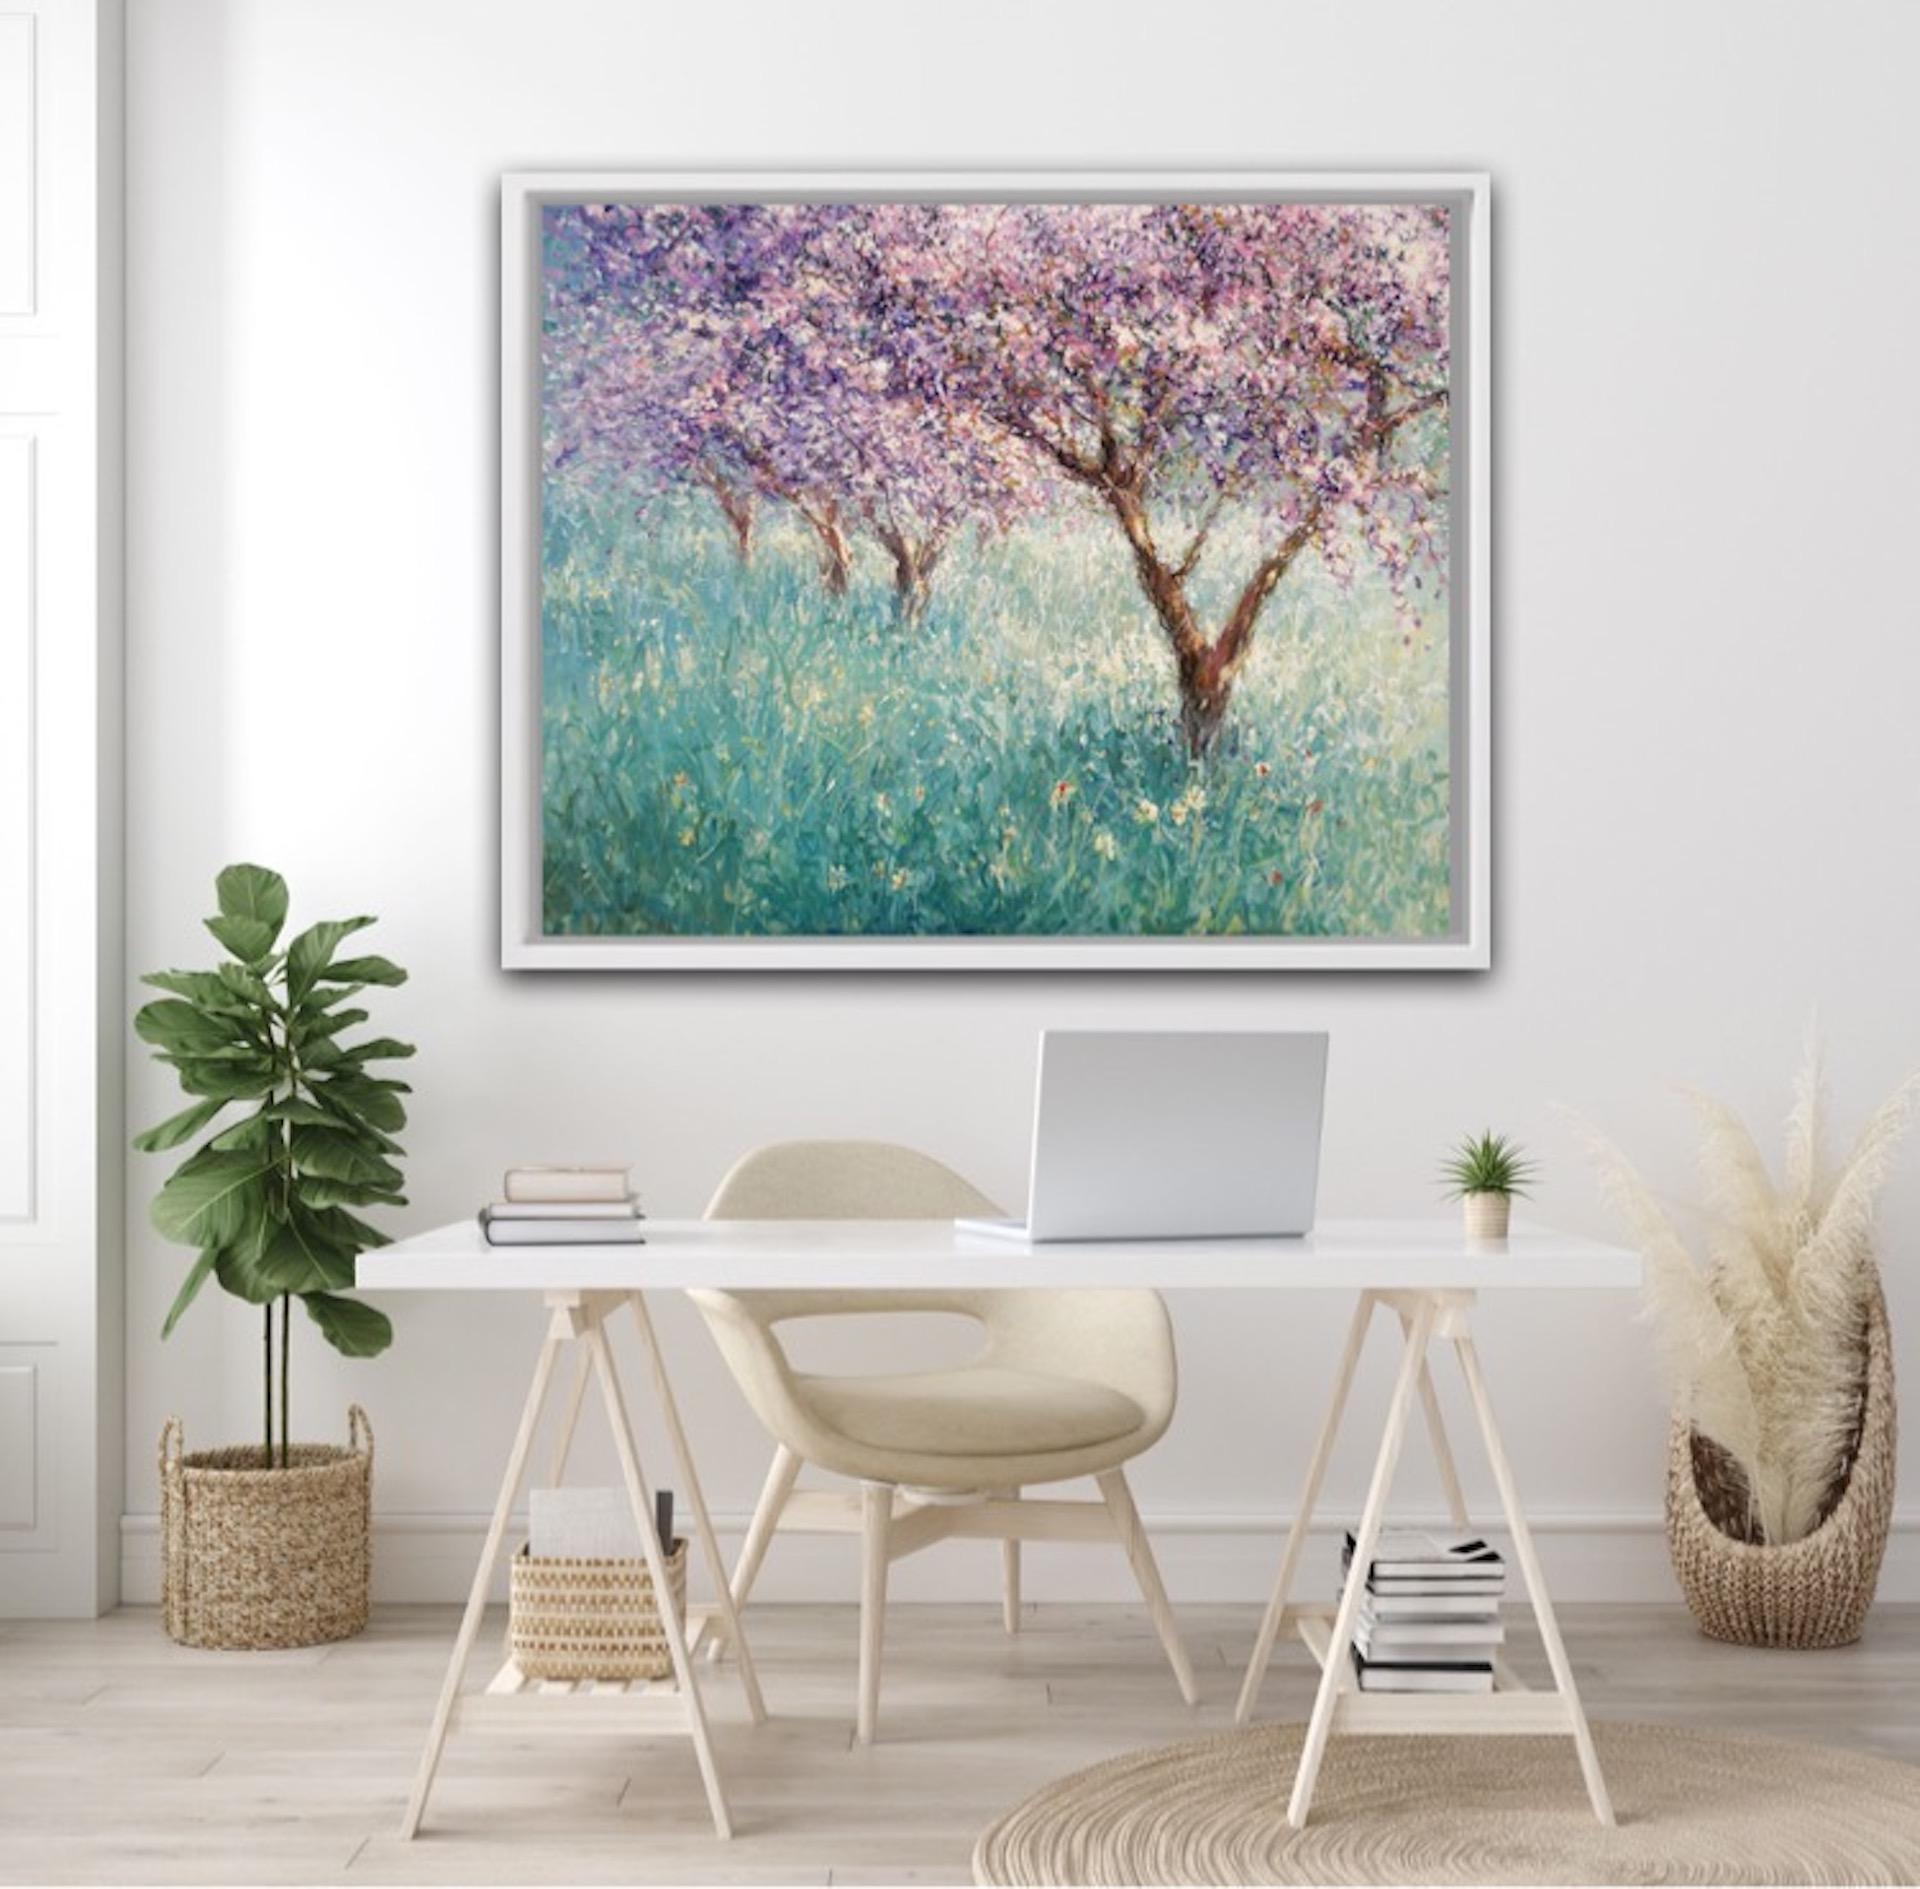 Mariusz Kaldowski
Cherry Trees
Original Acrylic Painting on Canvas
Acrylic Paint on Canvas
Sold Unframed
Framed Size: H 80cm x W 100cm x D 2.5cm
Please note that in situ images are purely an indication of how a piece may look.

Cherry is an original